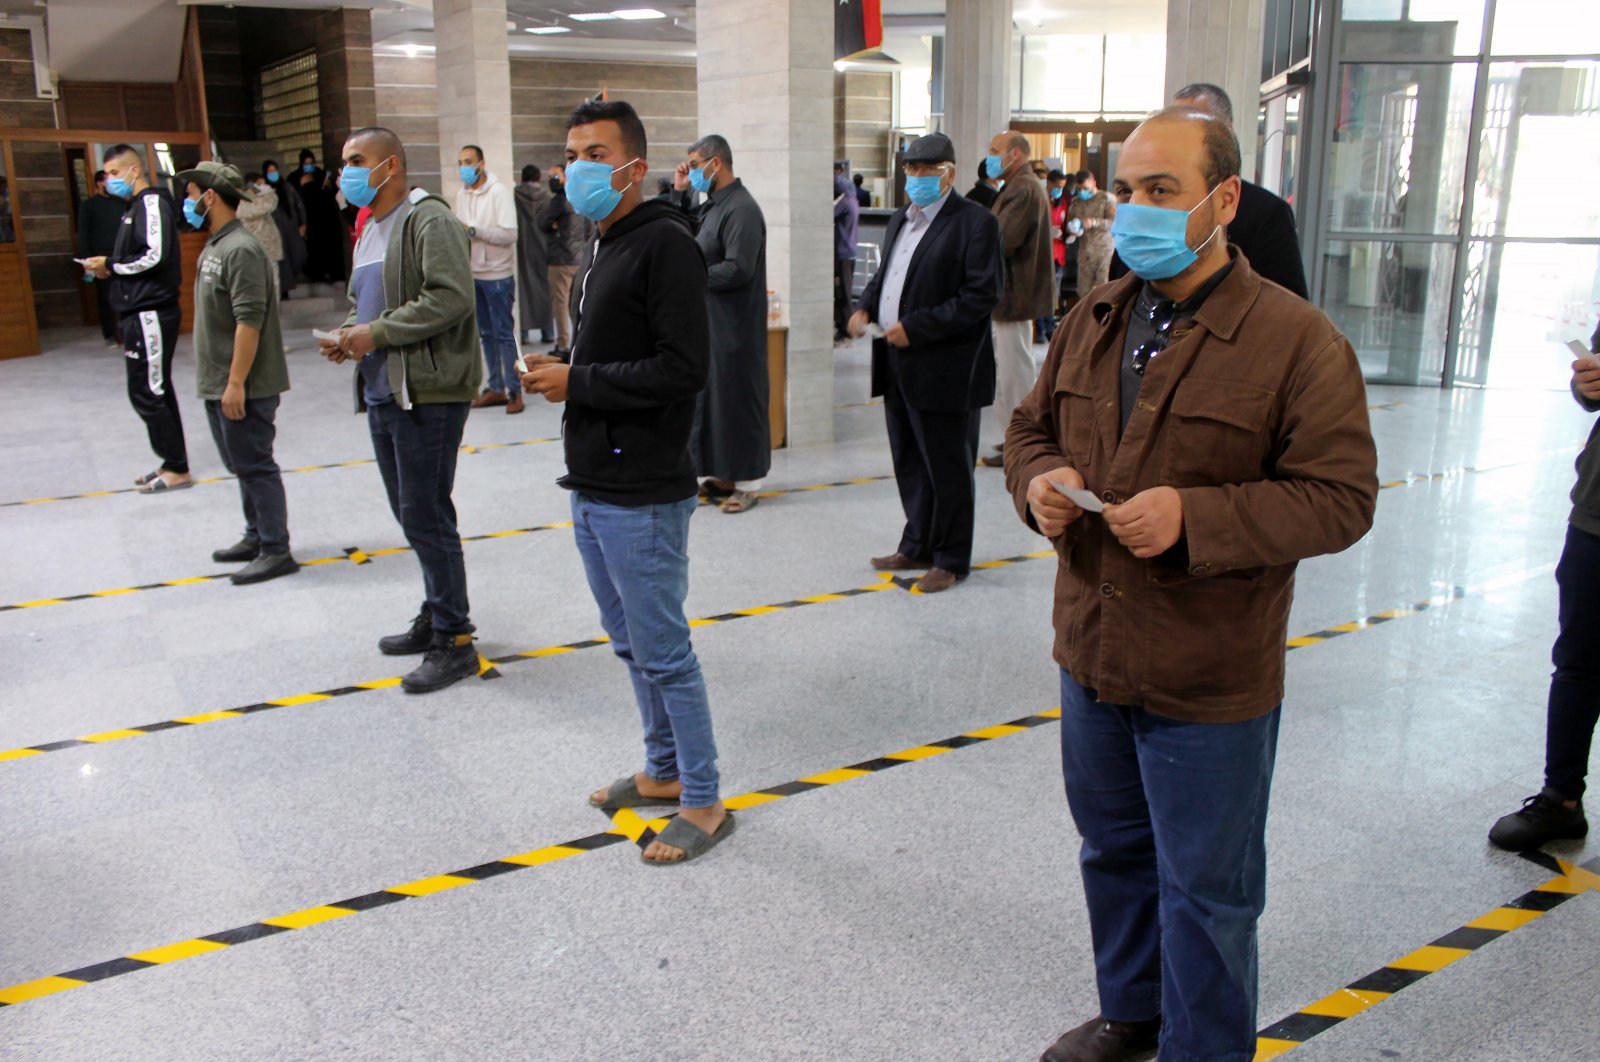 People wear protective masks, as part of precautionary measures against coronavirus disease (COVID-19), as they stand in a queue at a bank in Misrata, Libya March 22, 2020. Picture taken March 22, 2020. (Reuters Photo)